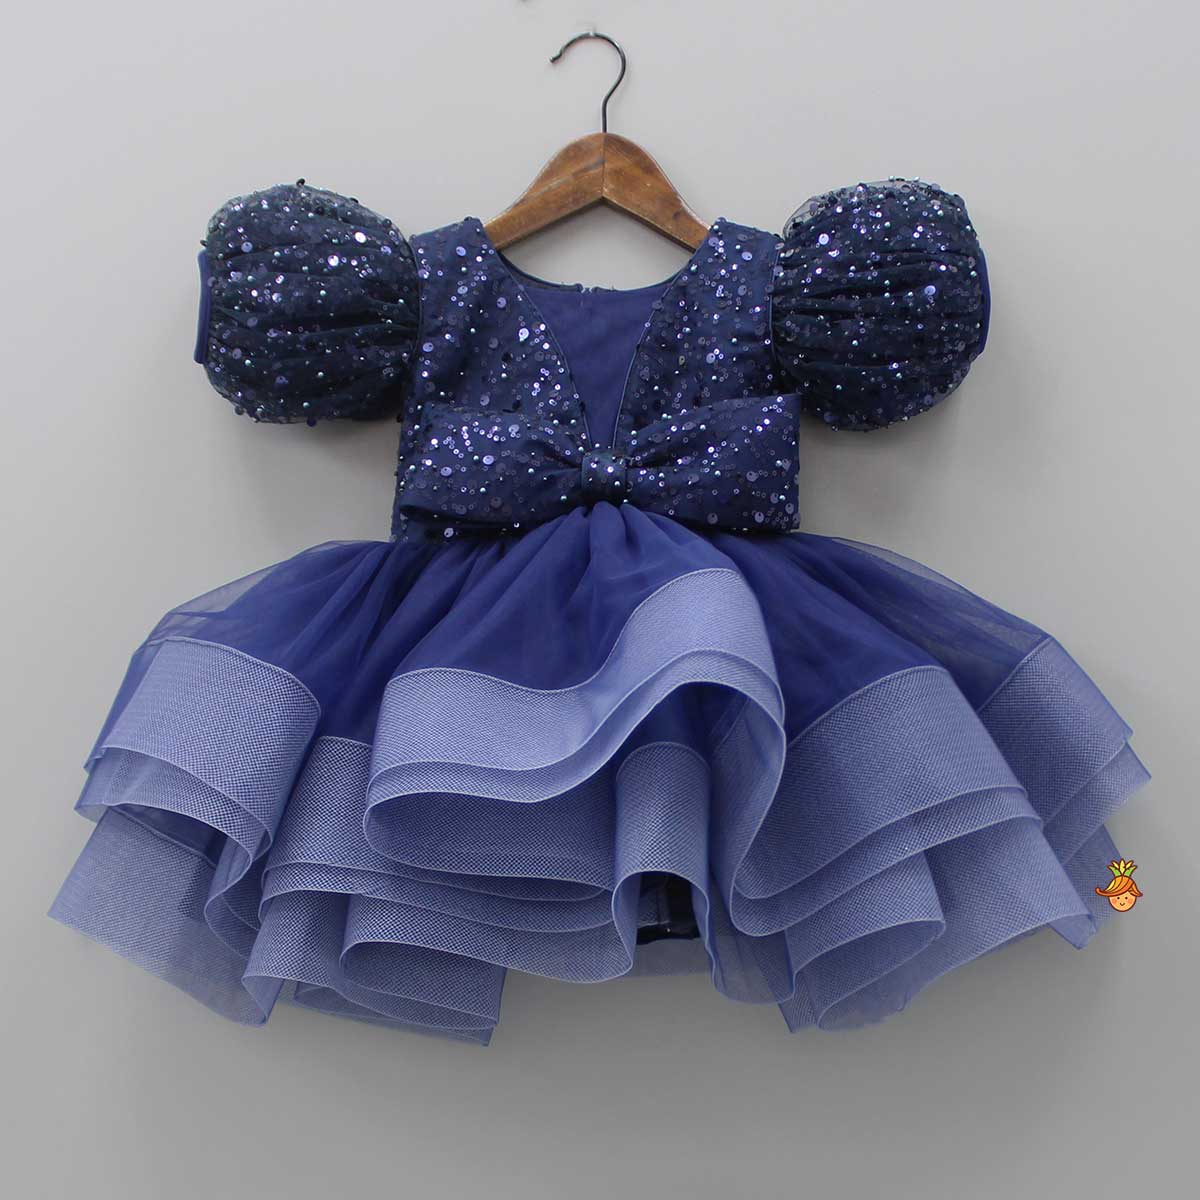 Sequined Ruffled Blue Dress With Bows And Matching Swirled Bow Headband